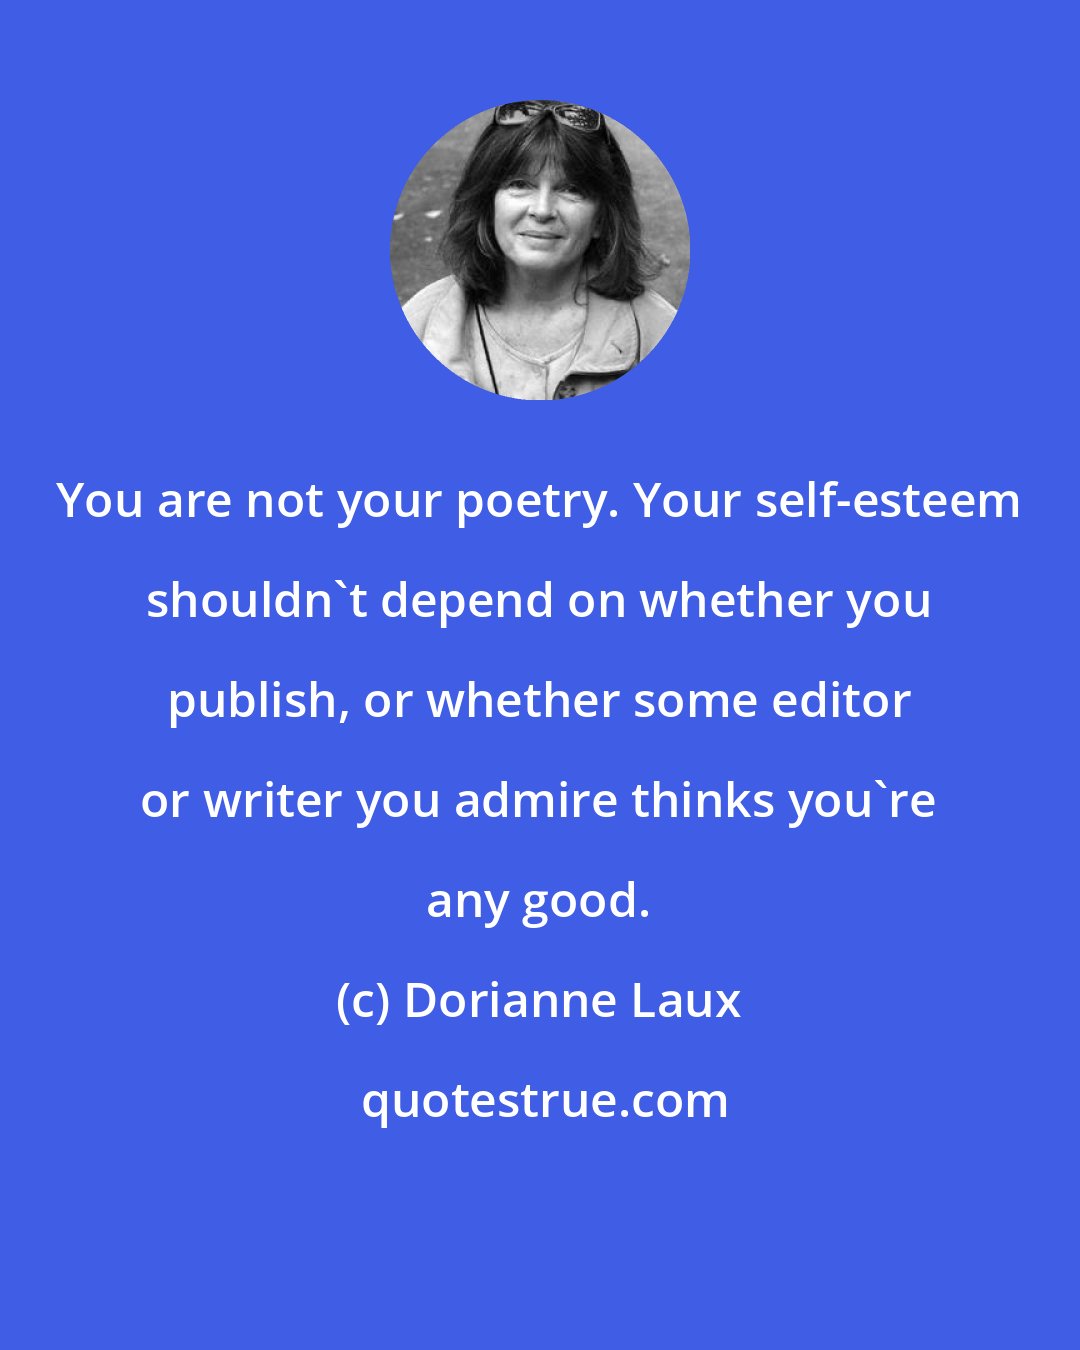 Dorianne Laux: You are not your poetry. Your self-esteem shouldn't depend on whether you publish, or whether some editor or writer you admire thinks you're any good.